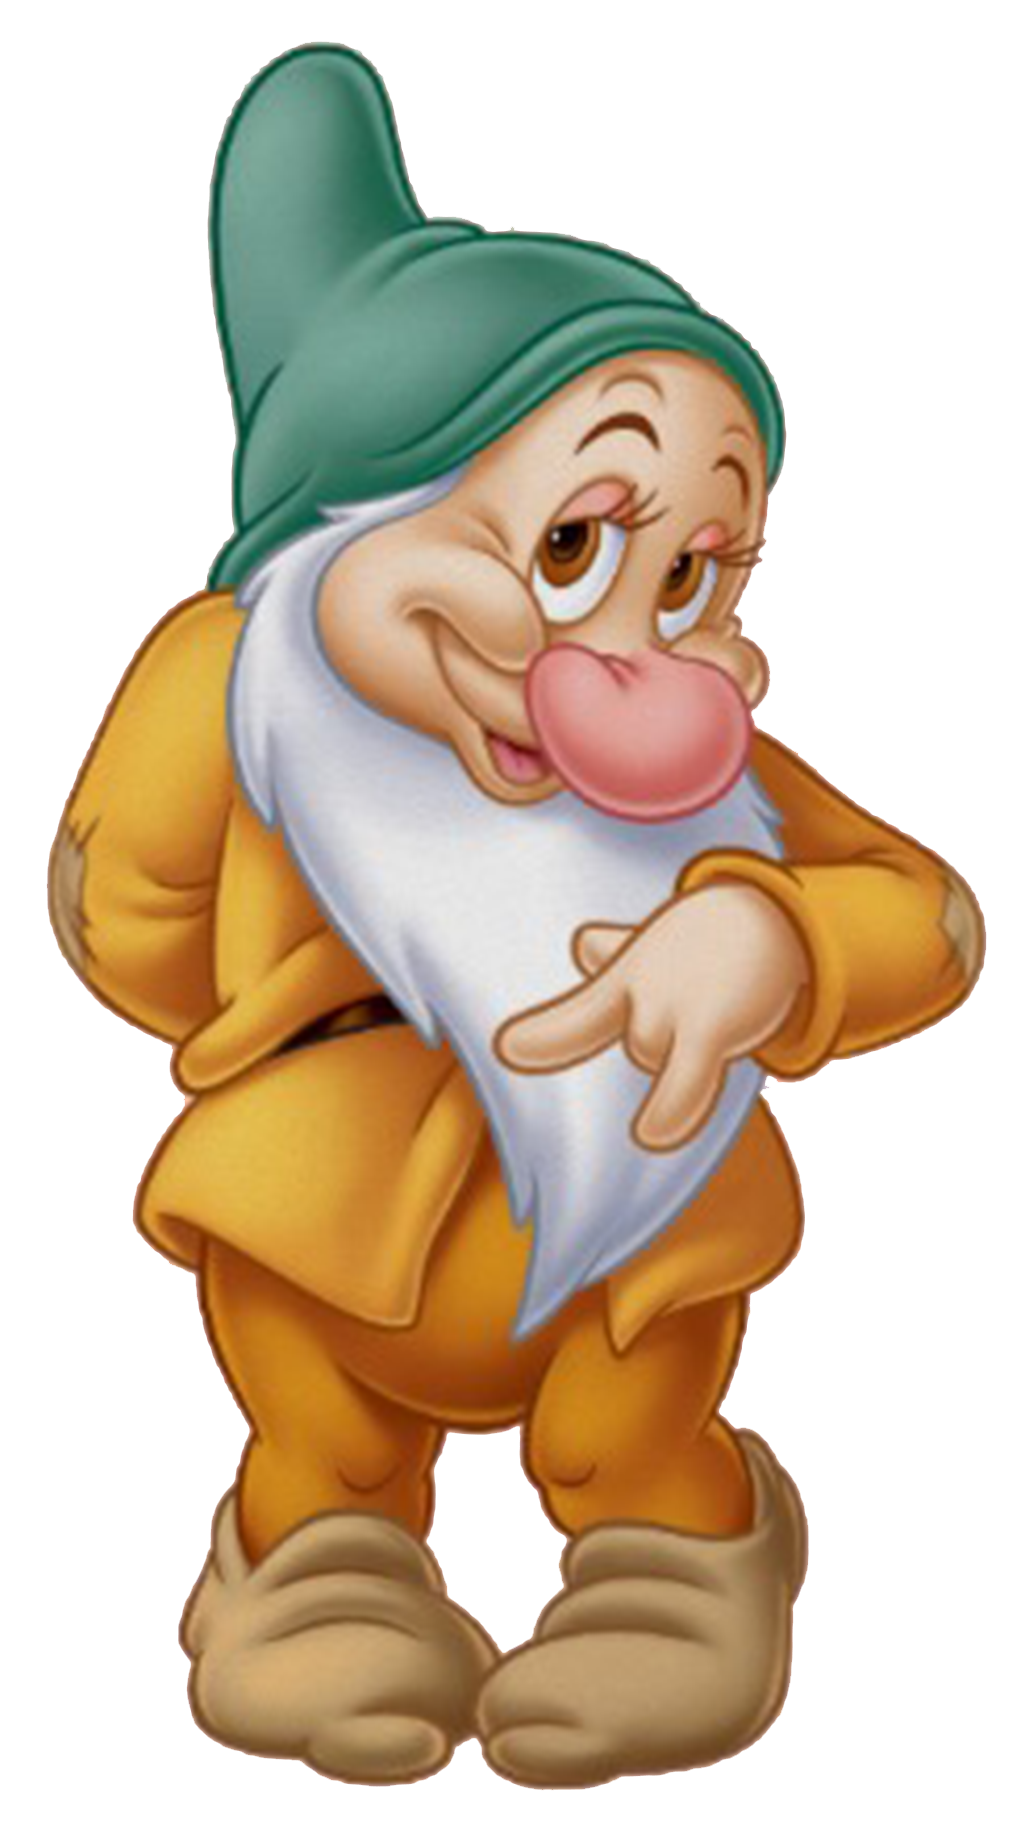 Character09 - Dopey.png PlusP